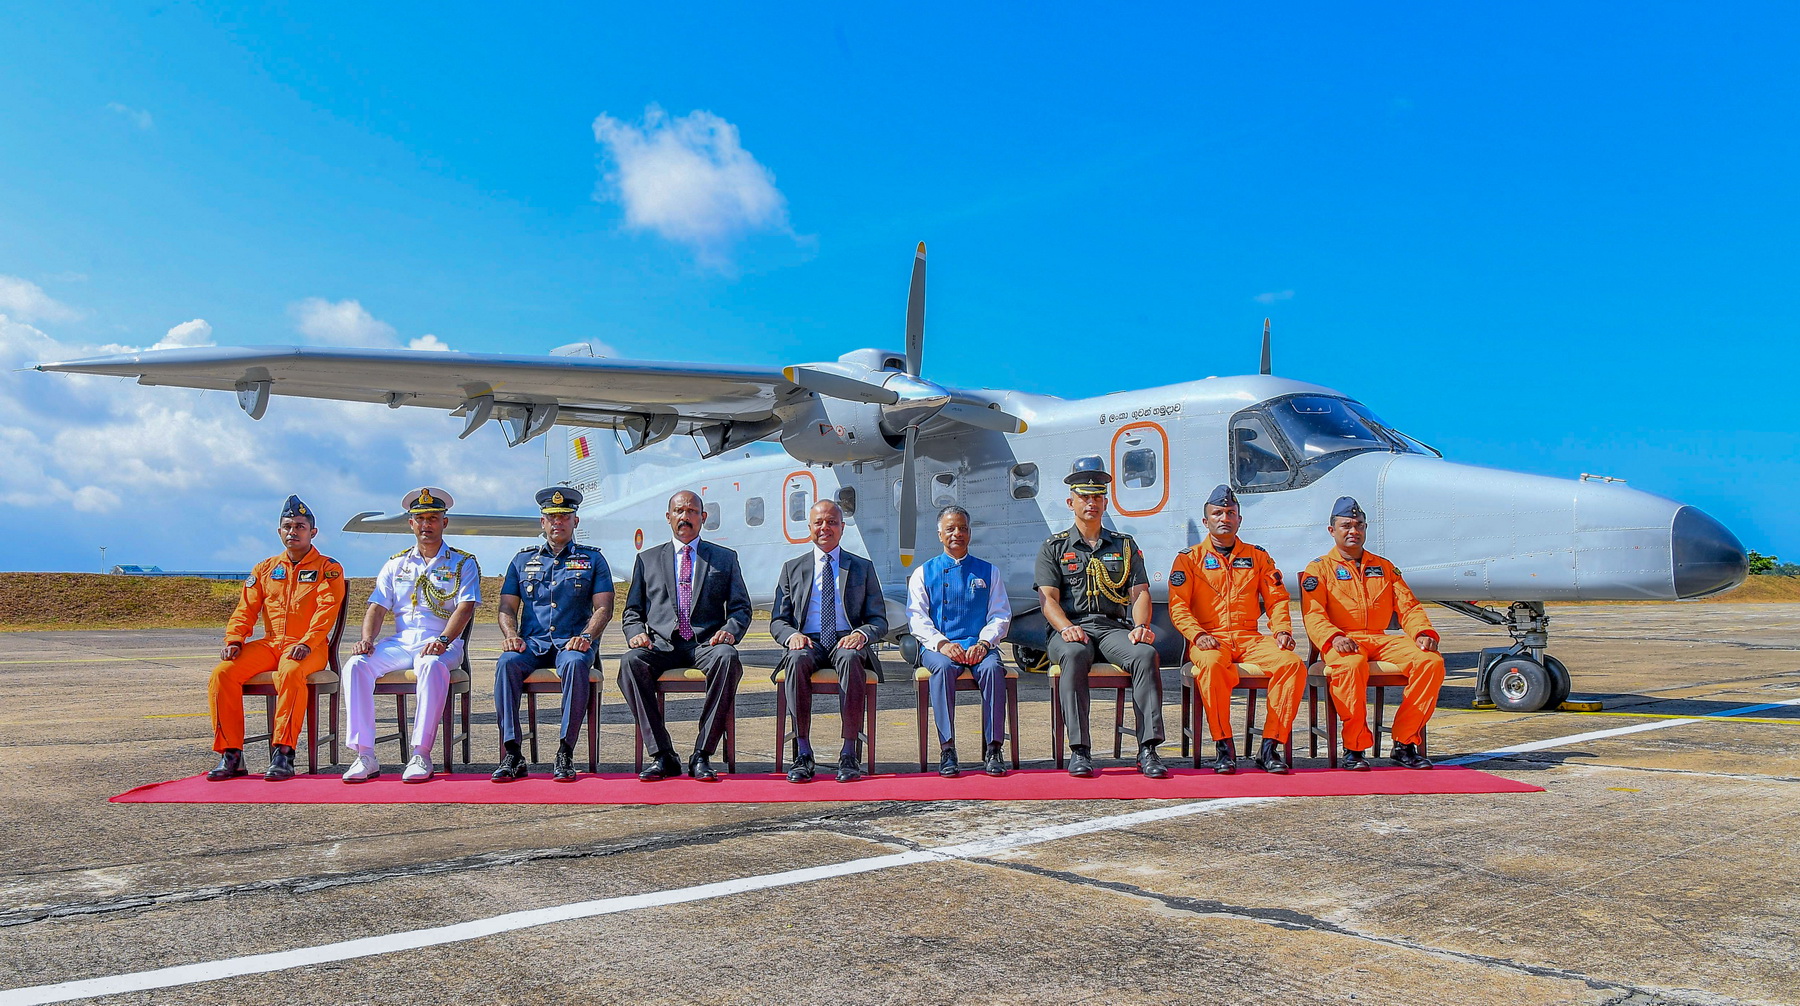 Indian Navy Dornier aircraft handed over to the Sri Lanka Air Force